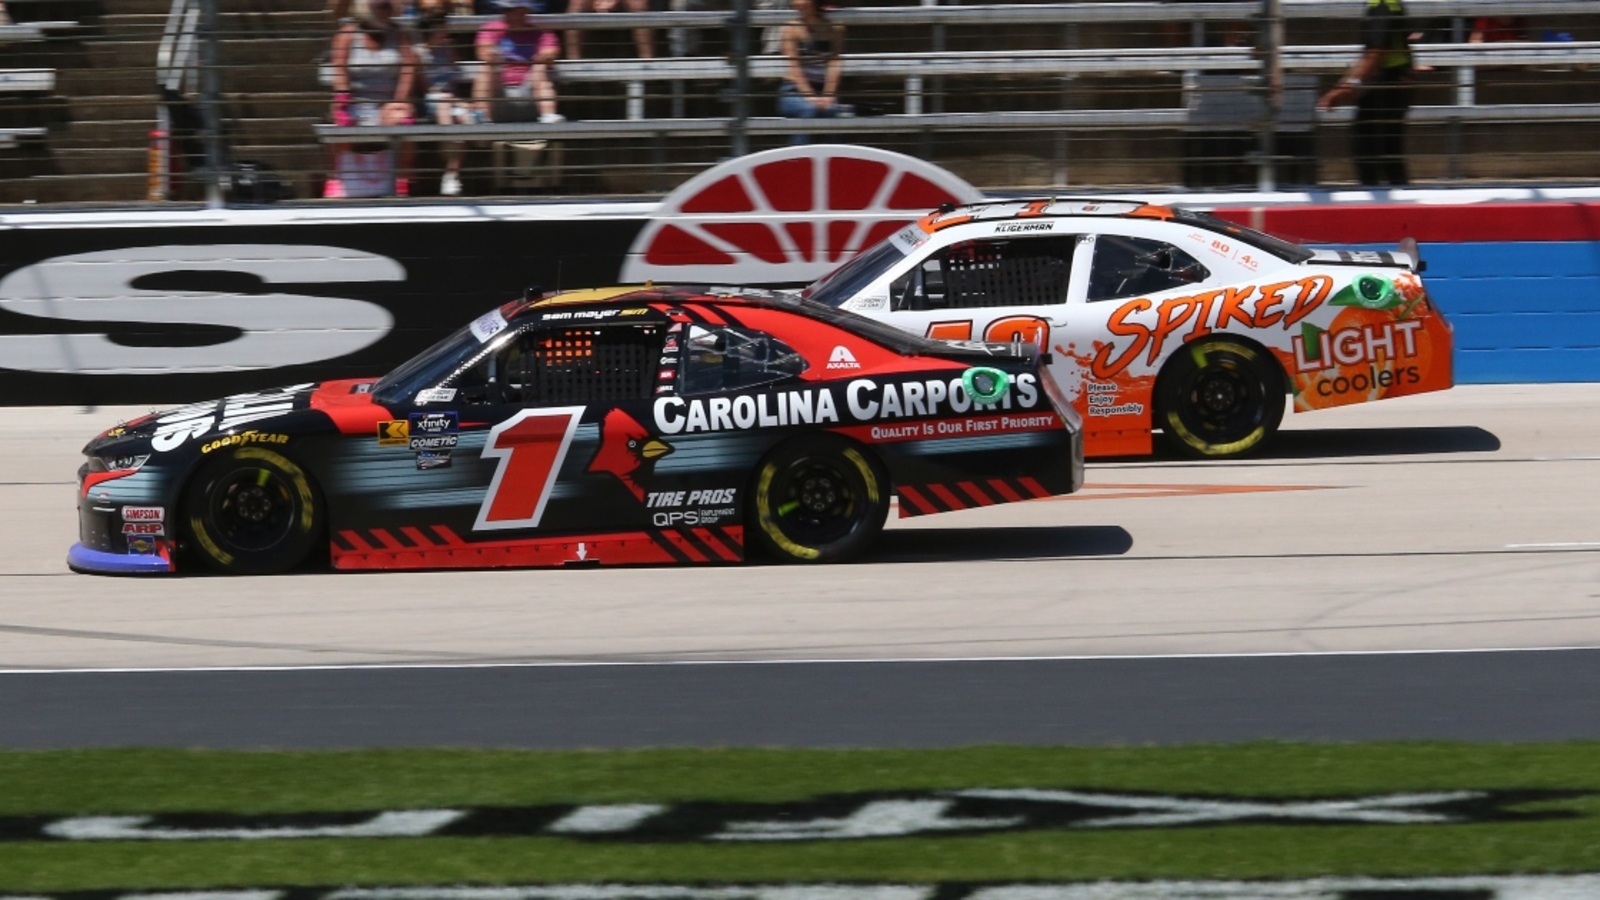 Sam Mayer wins at Texas by 0.002 seconds over Ryan Sieg in thrilling Xfinity Series finish